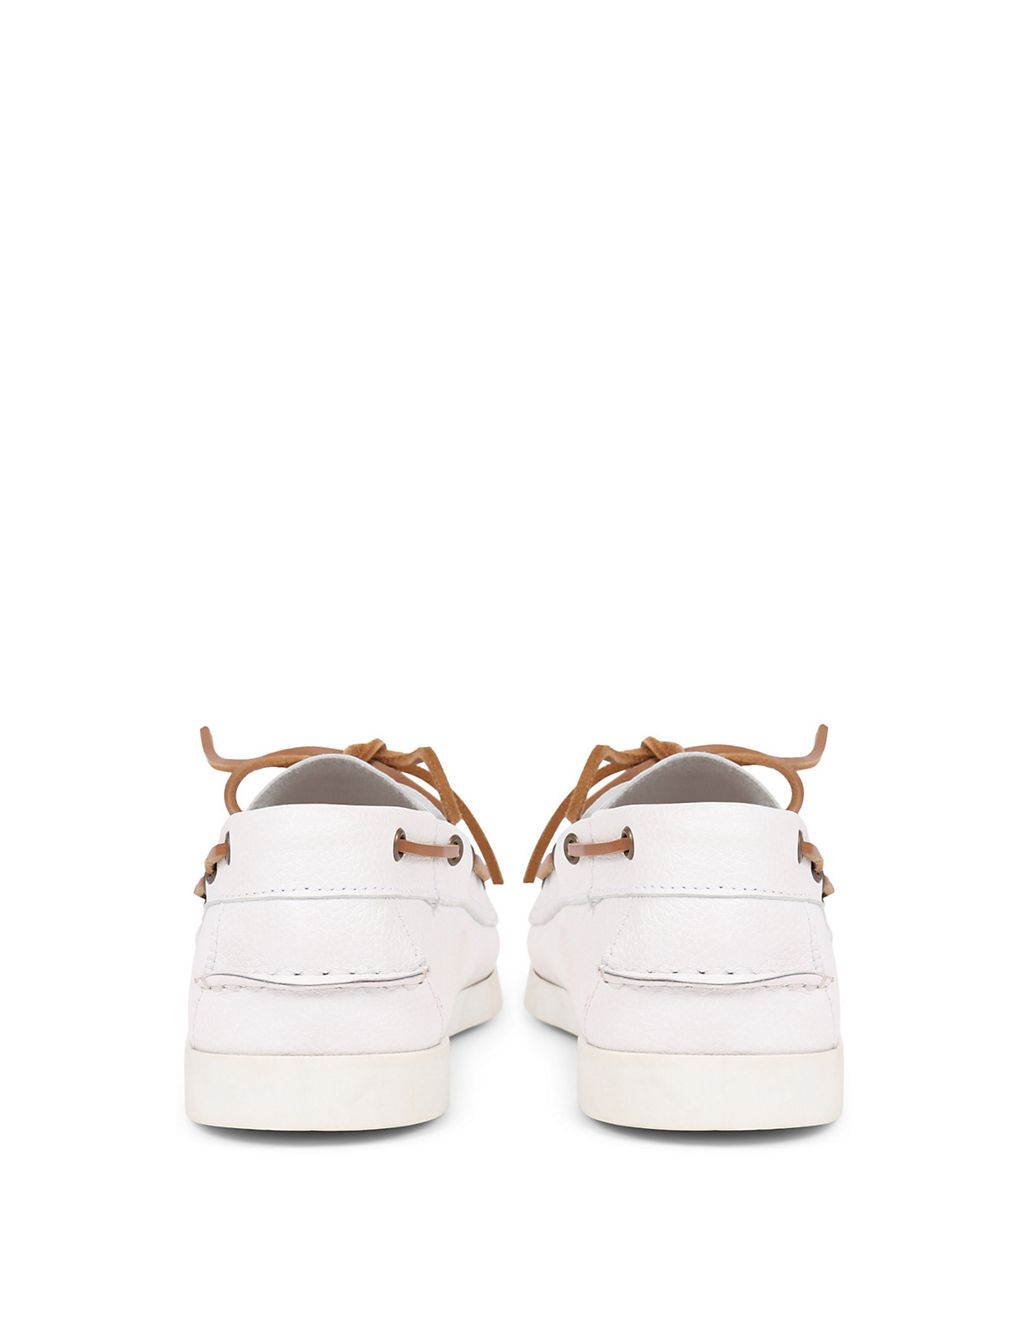 Leather Lace Up Flat Boat Shoes 4 of 7